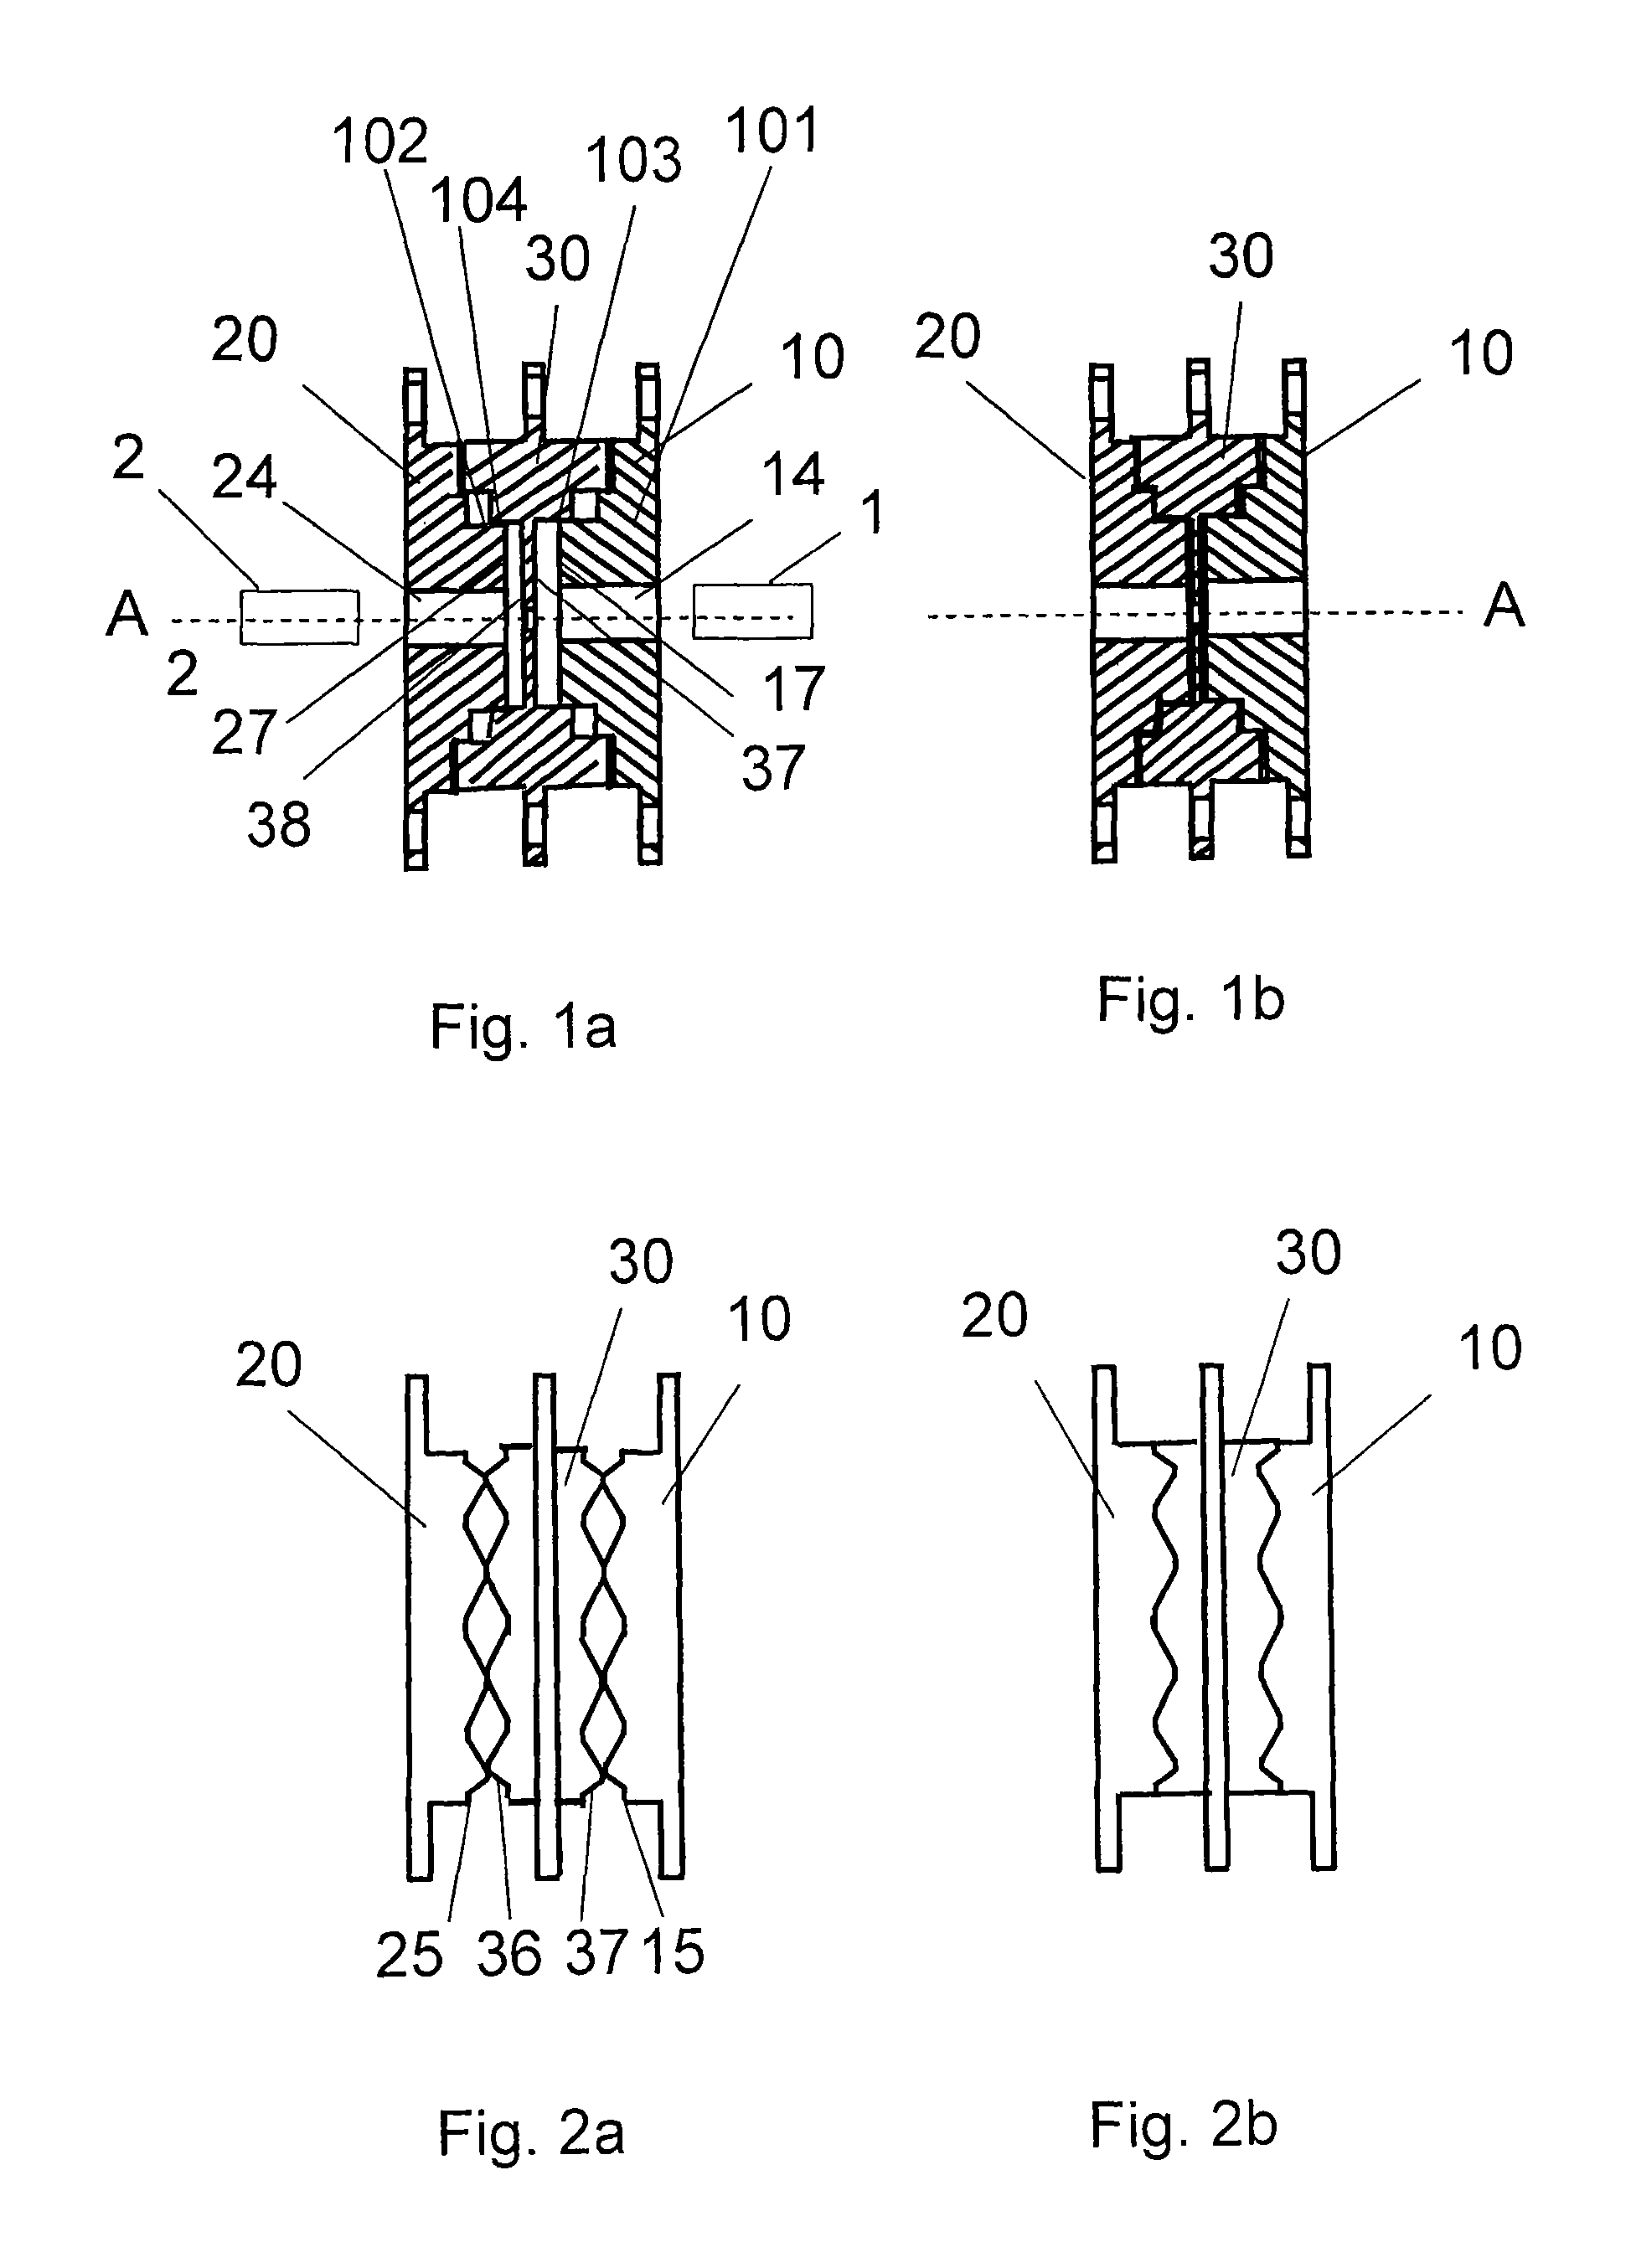 Rotary joint for switchably rotating between a jointed and non-jointed state to provide for polarization rotation